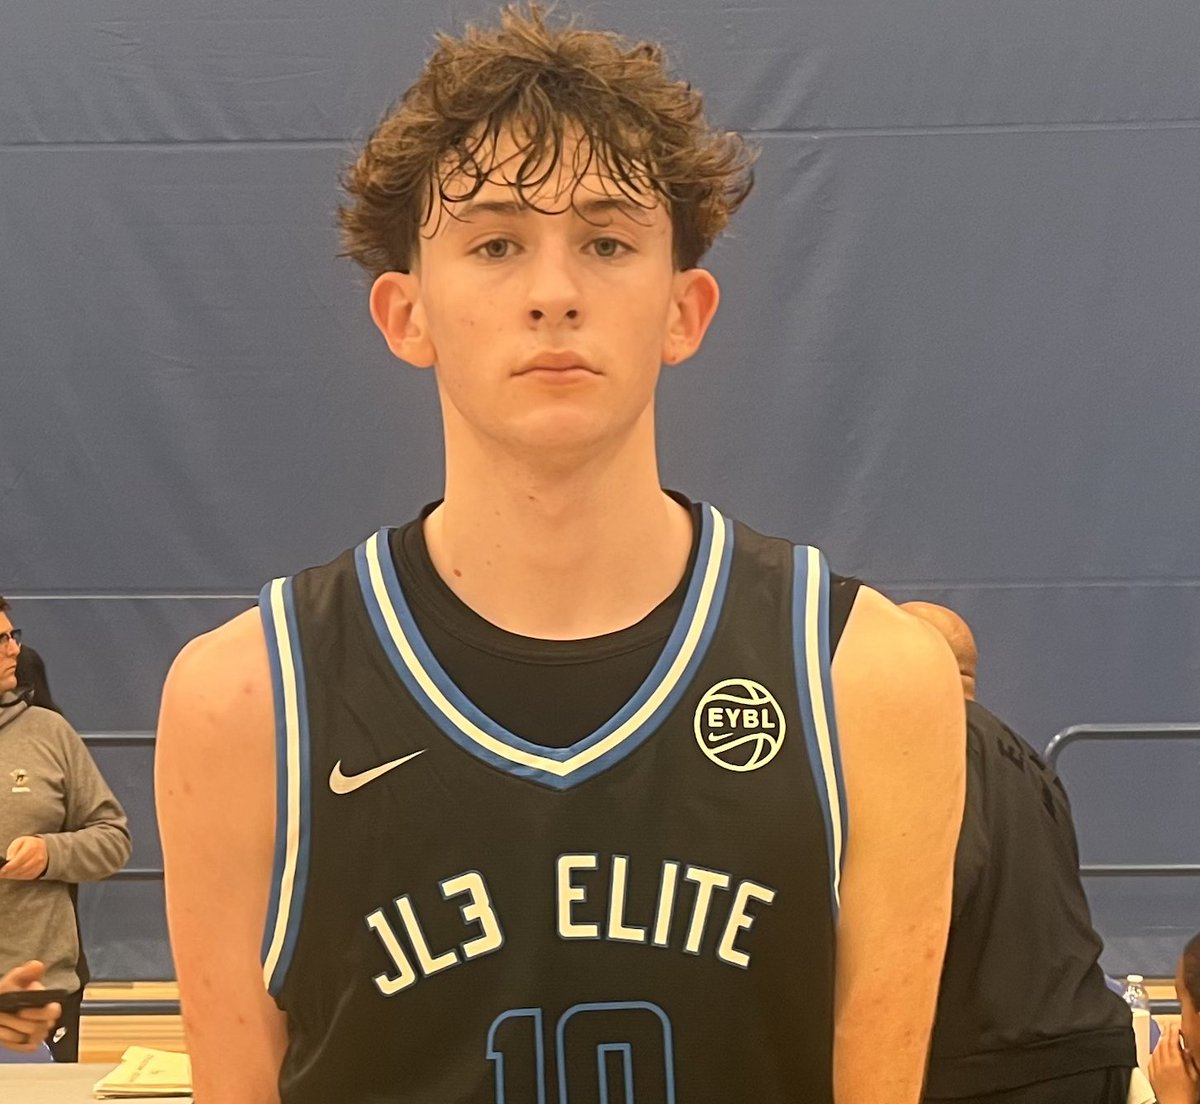 Greetings from @madehoops WestMania in Orange County. Just spoke with four-star F Hudson Greer (2025), who says he's looking into make a return trip to Creighton in addition to possible visits to Alabama and Arizona this fall.